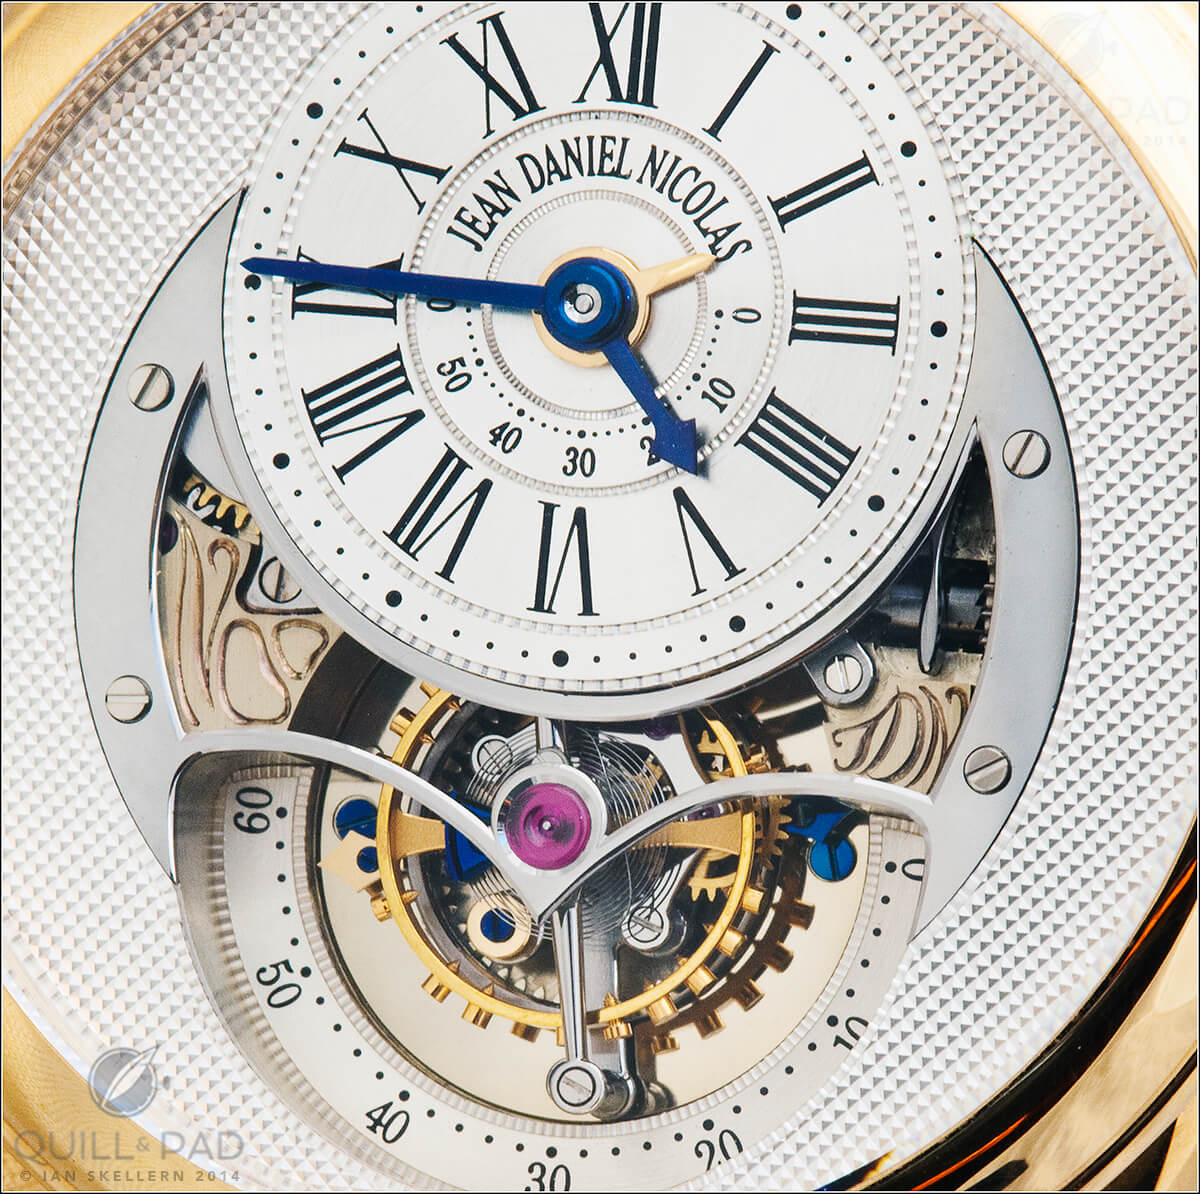 Exquisite dial details of the Jean Daniel Nicolas Two-Minute Tourbillon by Mr. Daniel Roth. The engraving on left is a stylized 